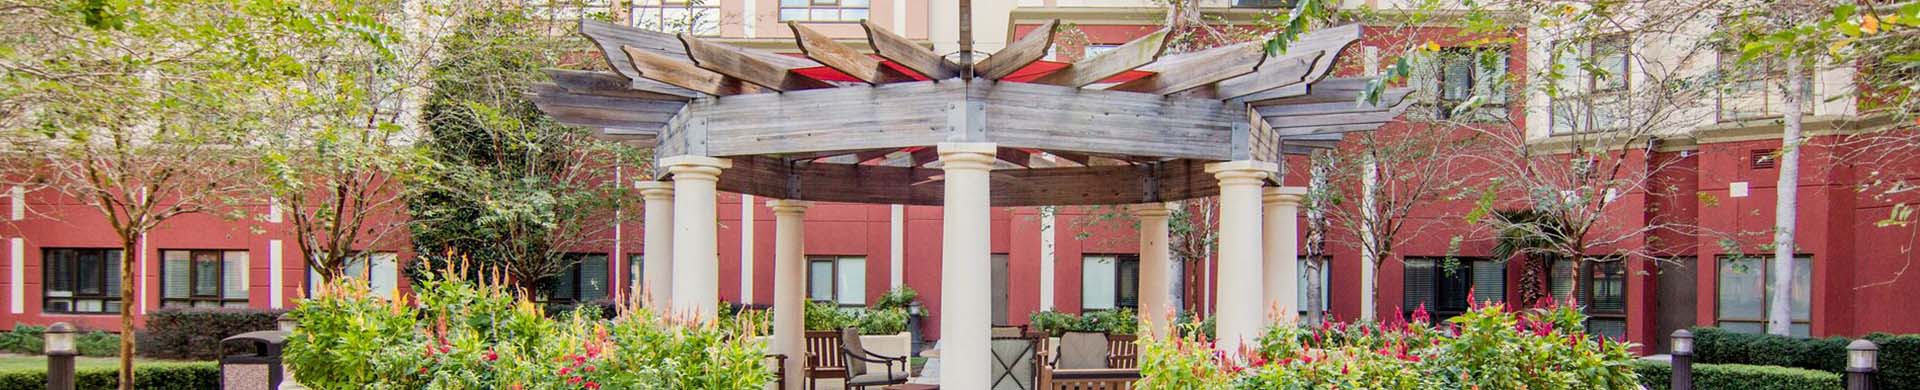 Outdoor seating area under the pergola at Freedom Pointe at the Villages 